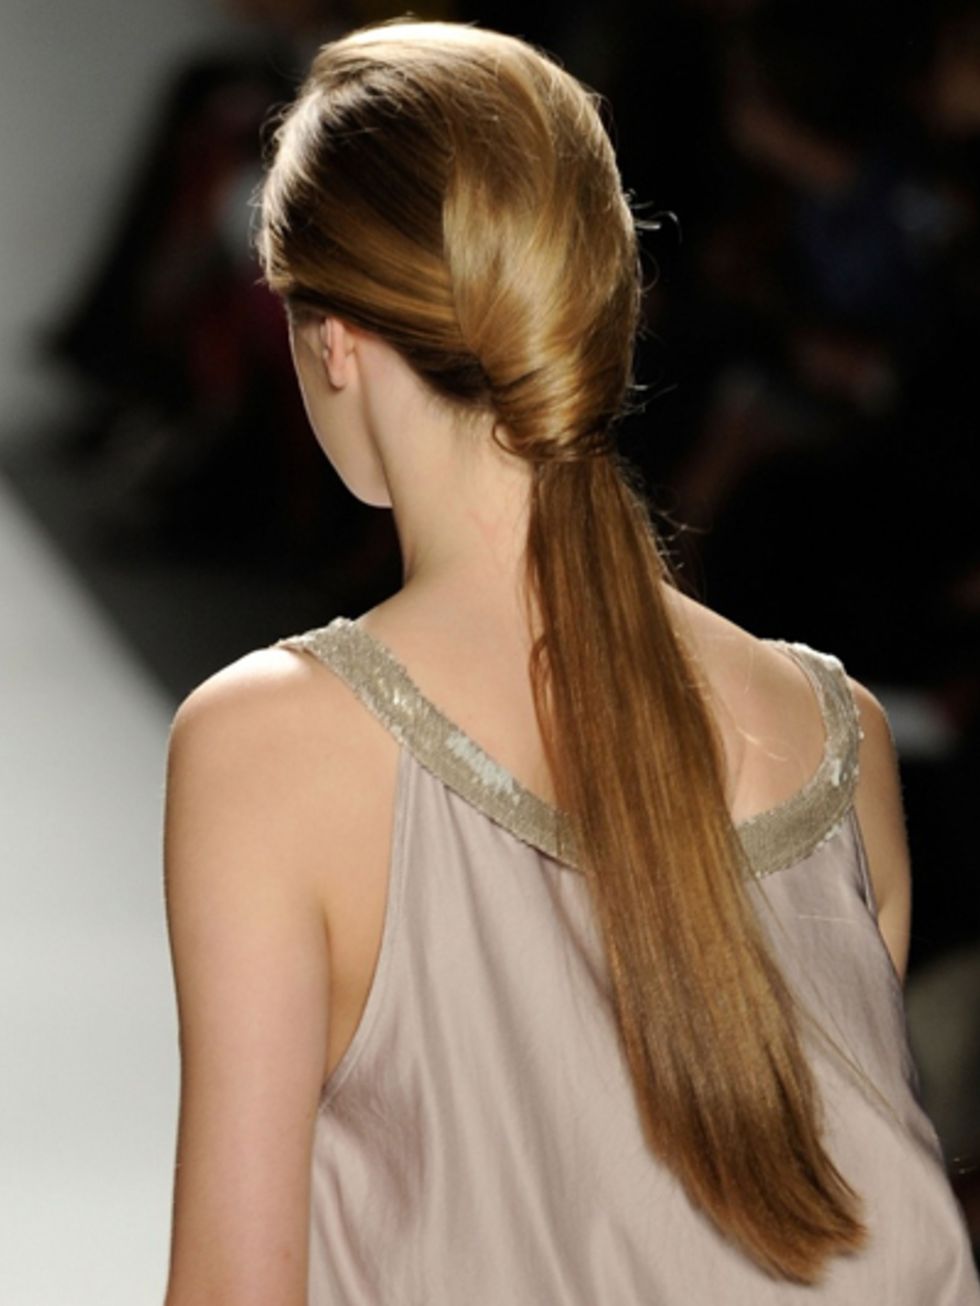 Hairstyle, Shoulder, Style, Fashion, Sleeveless shirt, Neck, Beauty, Long hair, Brown hair, Earrings, 